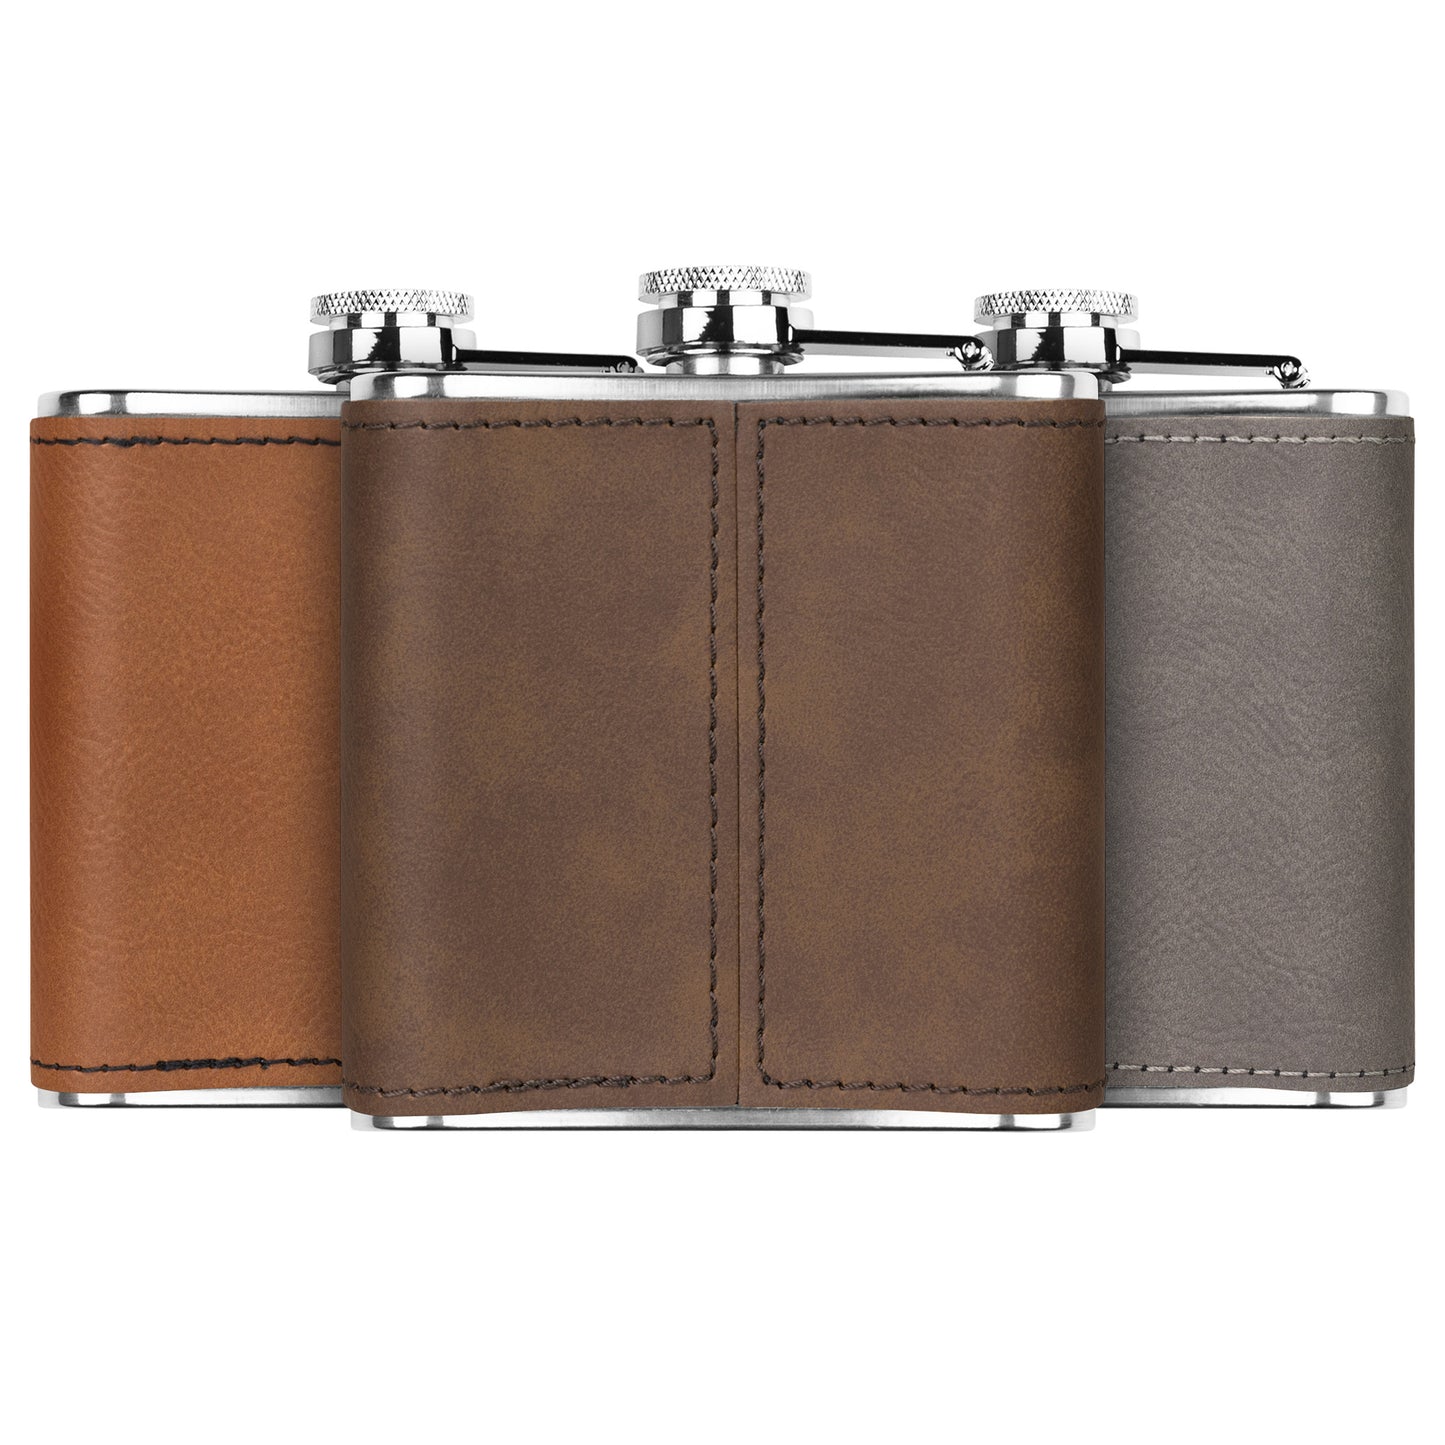 No Fears, No Fences, Nobody and No Reins Stainless Steel Flask